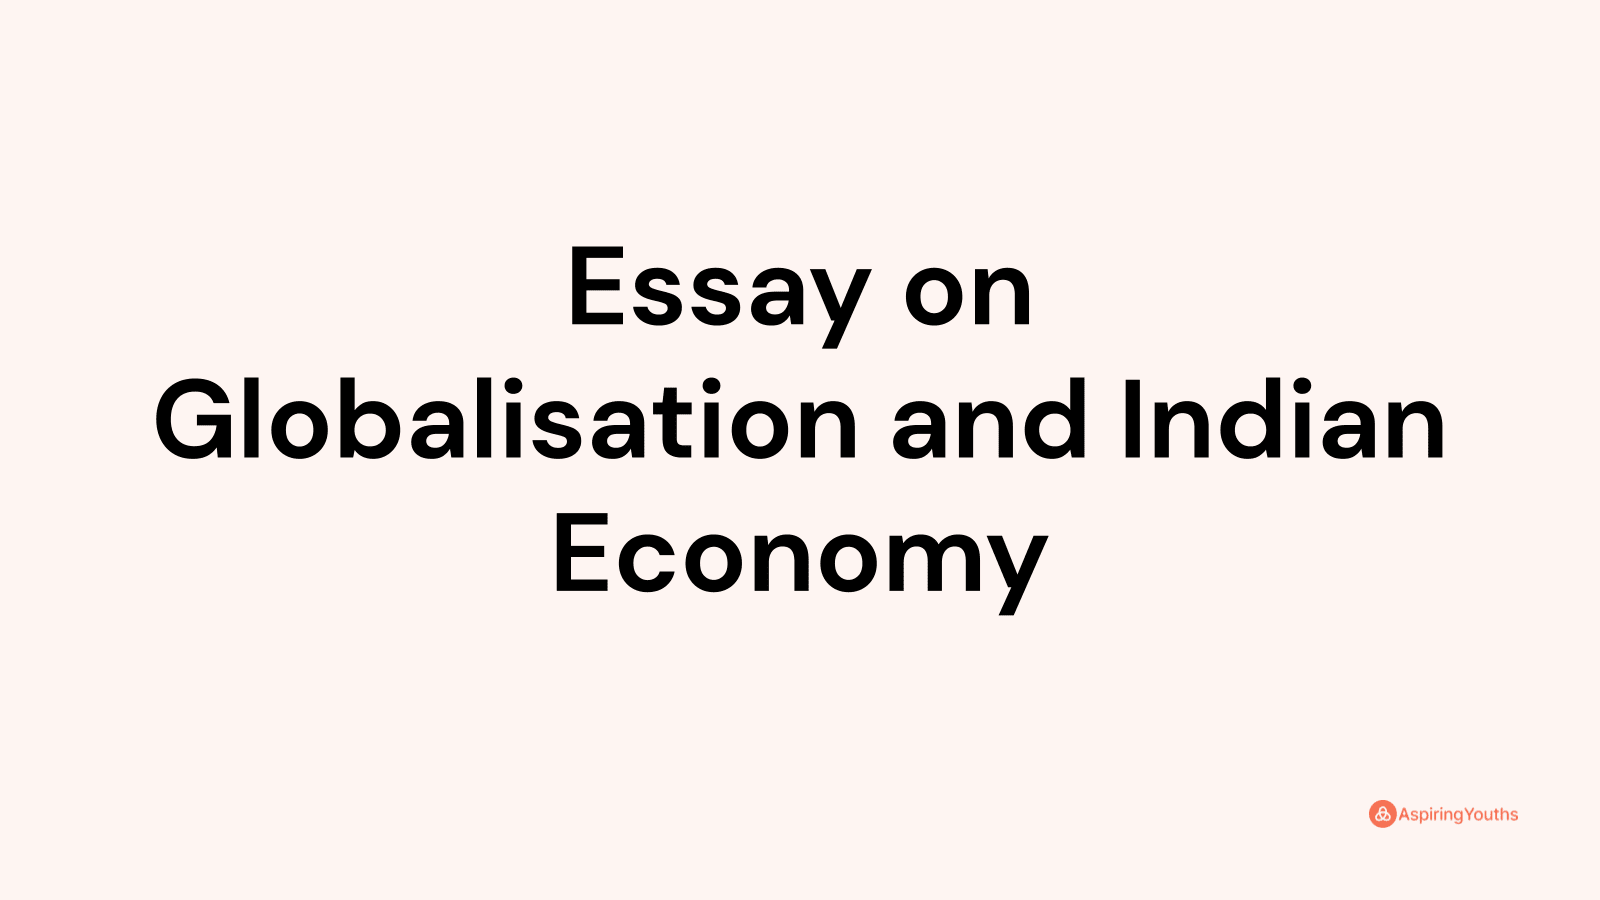 essay on globalisation in india